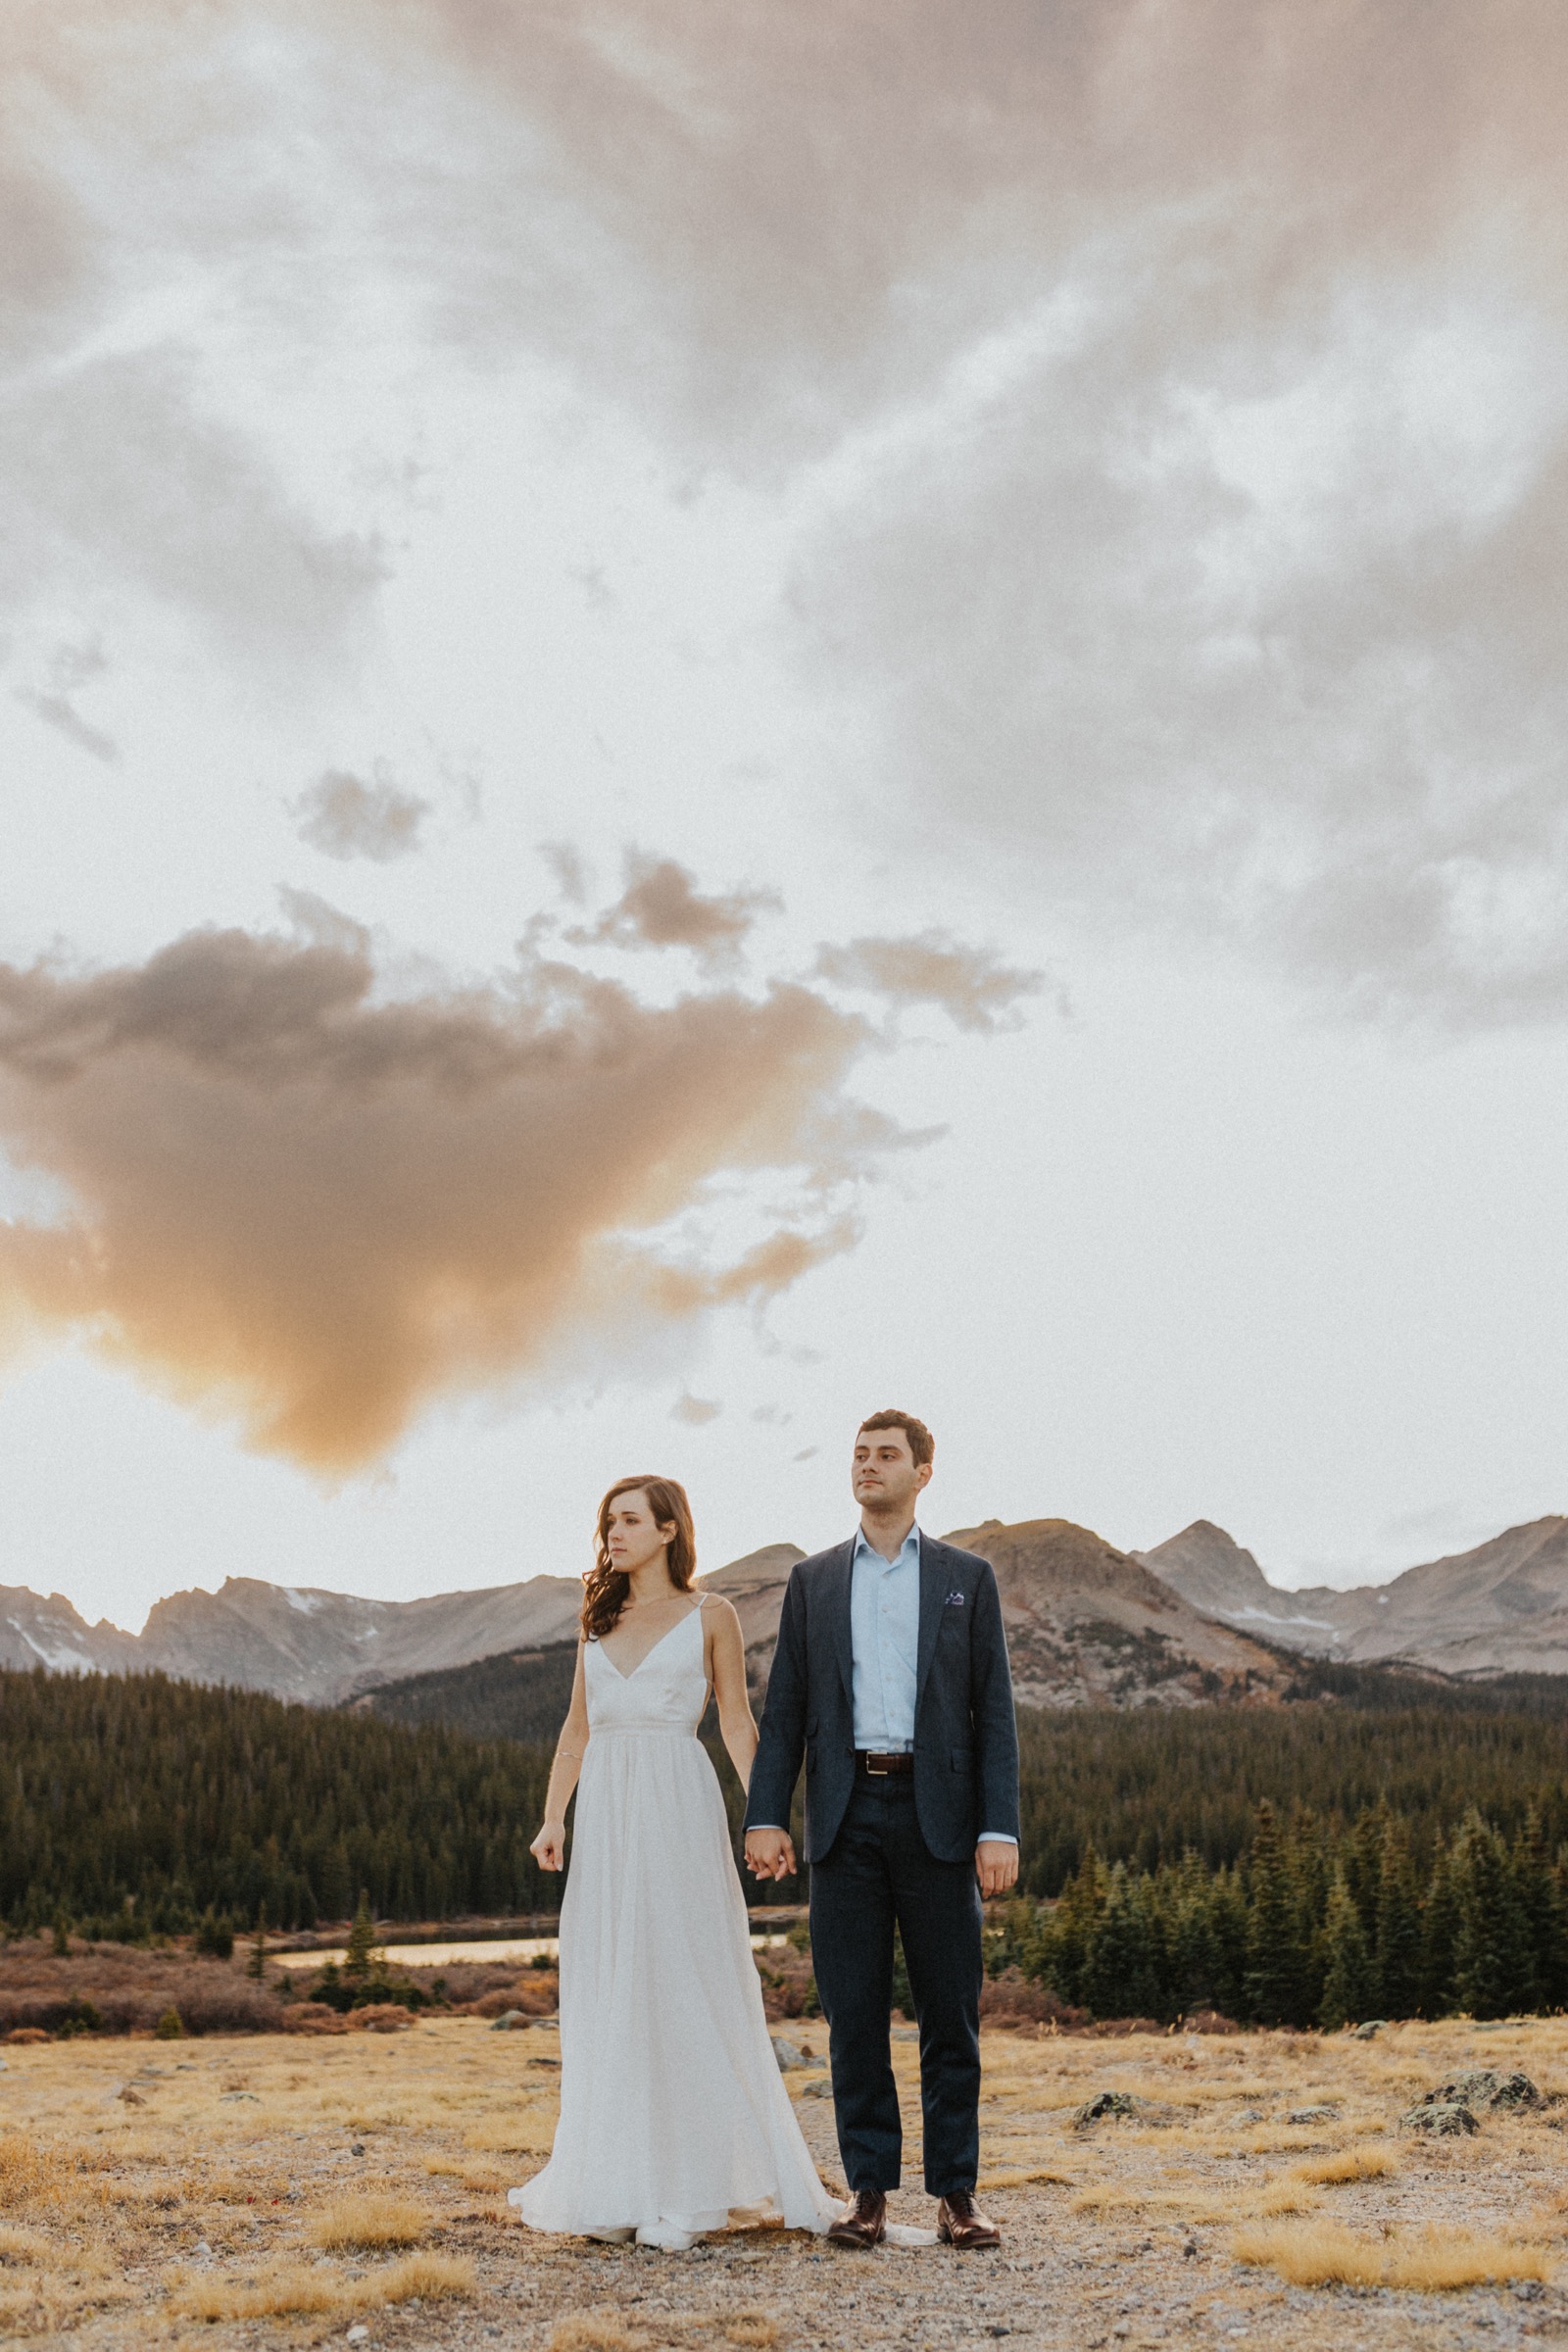 Cinematic image of married couple standing in front of mountains with a sunset sky in the background during their elopement in Colorado.